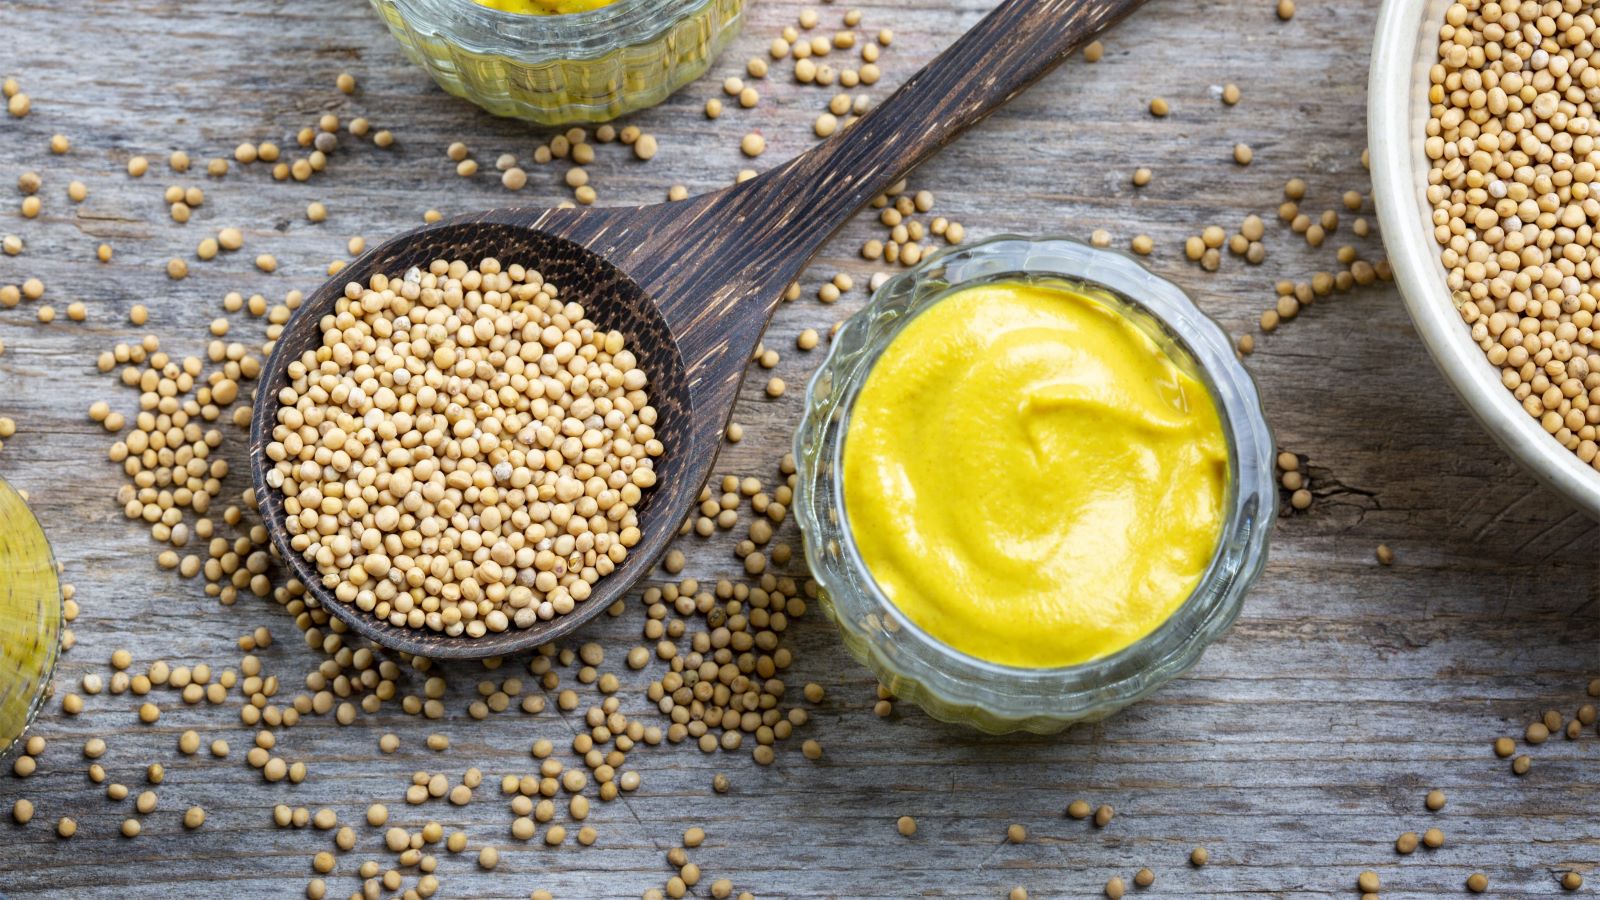 Some People Swear by Mustard for Heartburn. Should You?